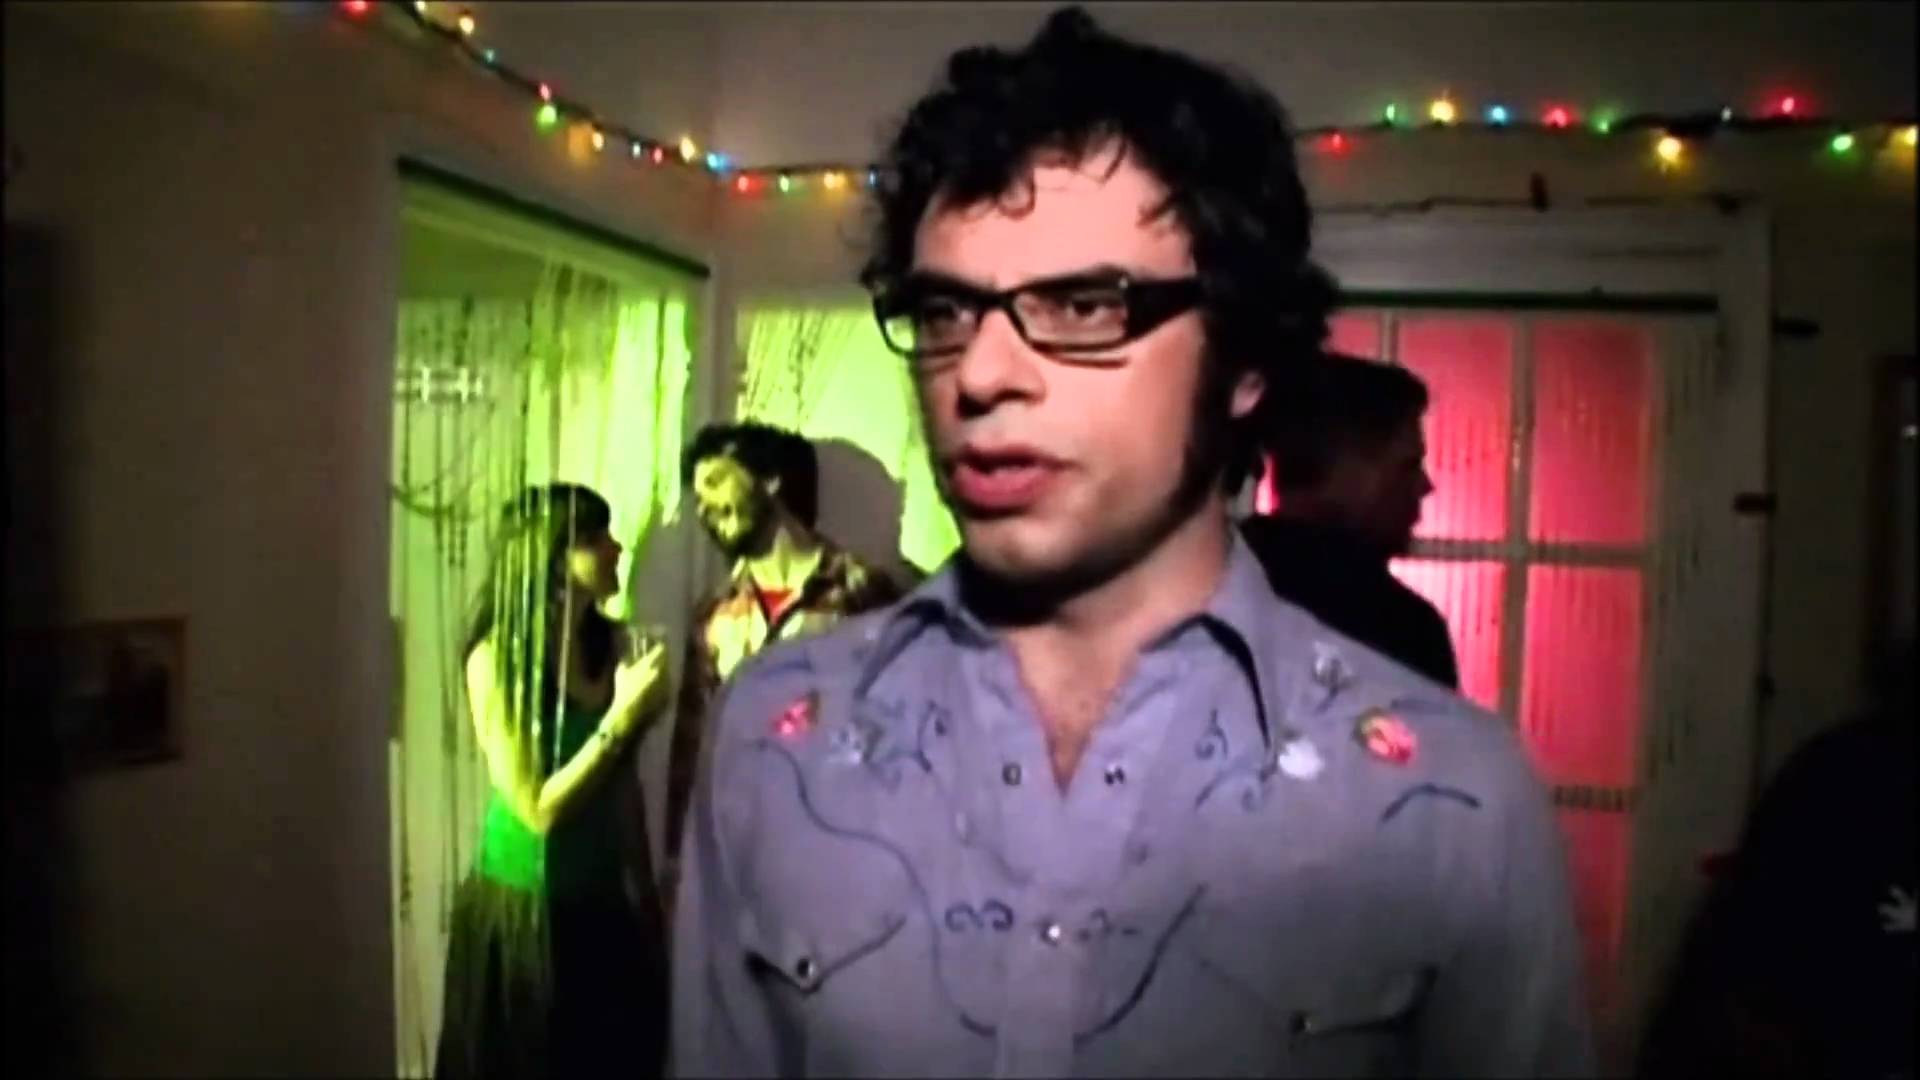 HD Quality Wallpaper | Collection: Music, 1920x1080 Flight Of The Conchords